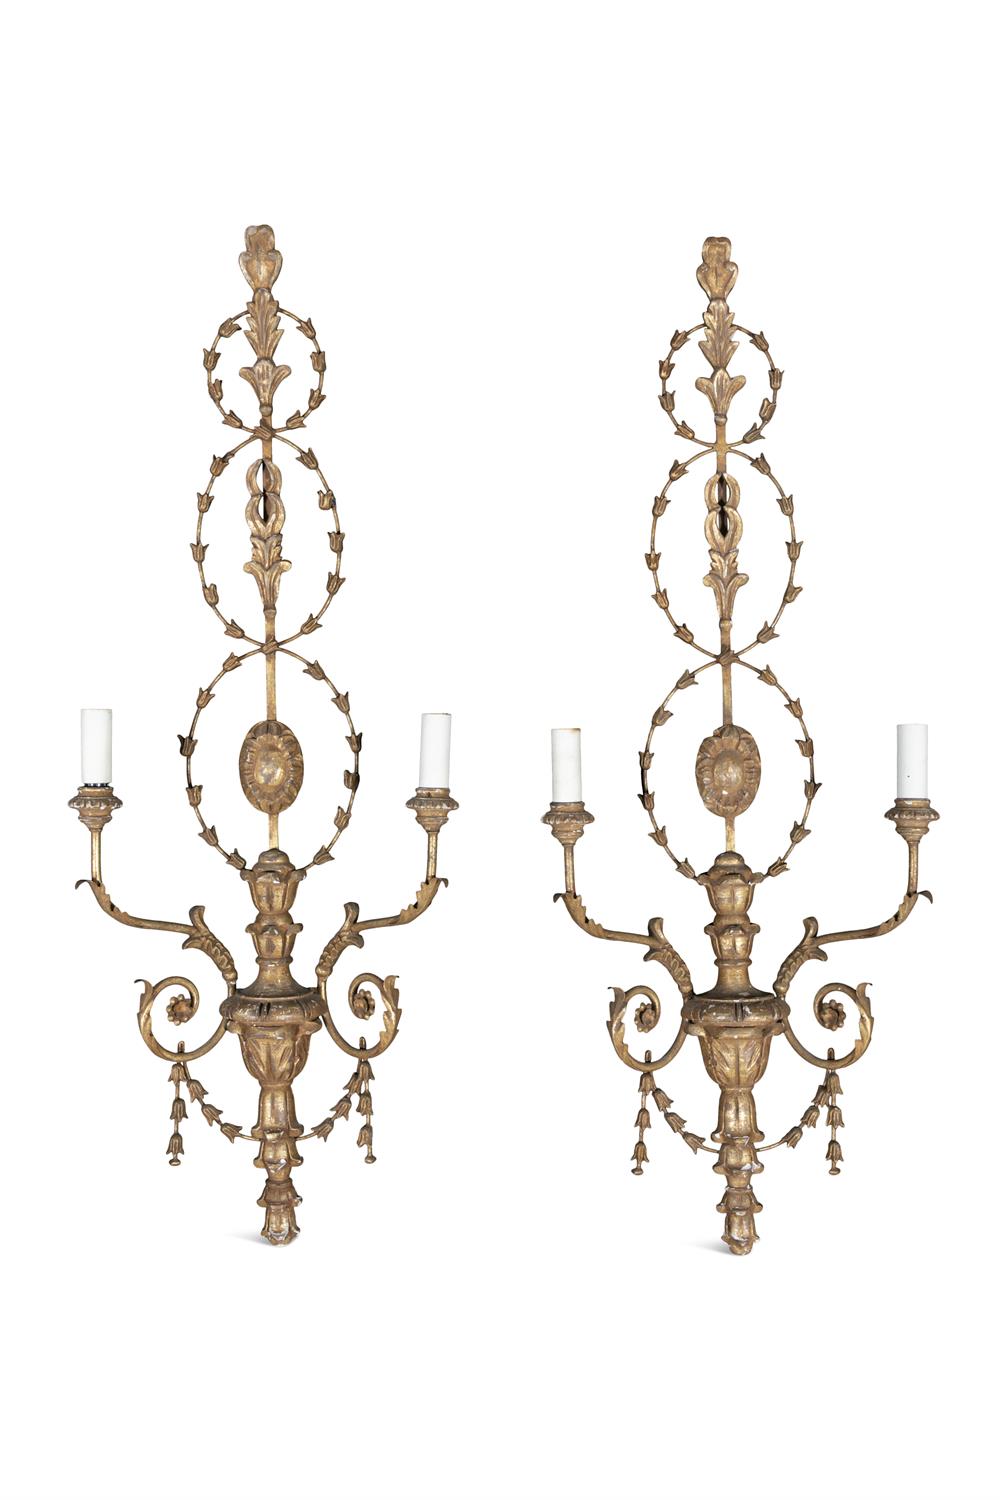 A PAIR OF CARVED GILTWOOD AND GESSO TWO BRANCH WALL SCONCES, c. 1900, of classical design with